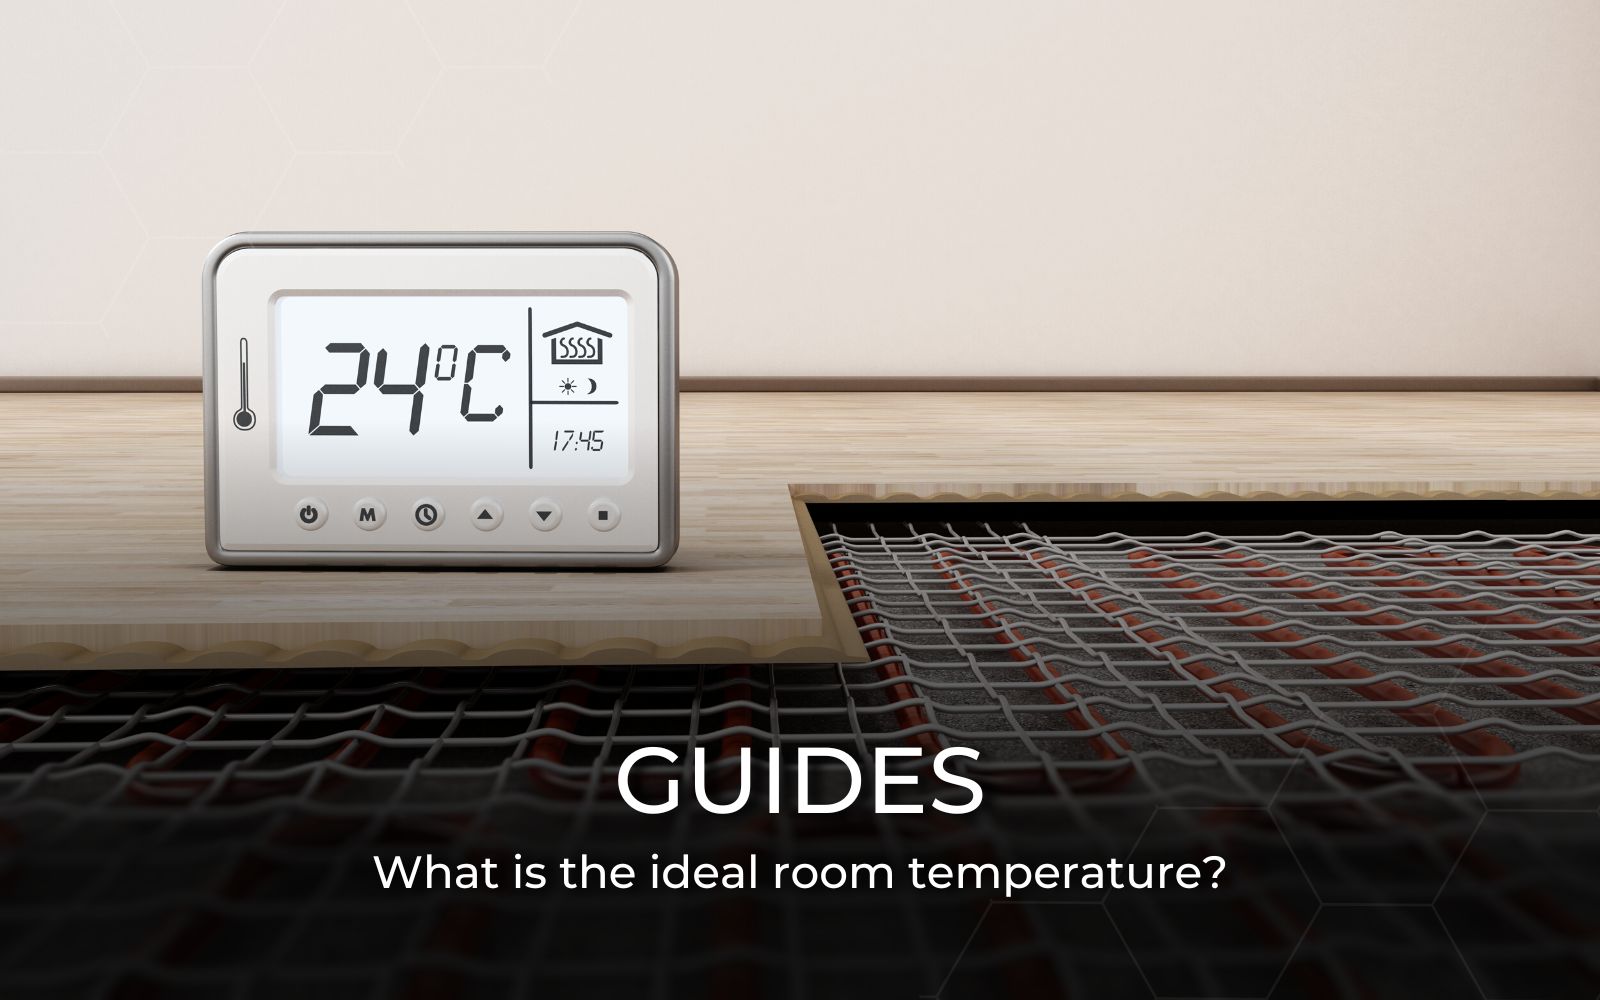 What is the ideal room temperature